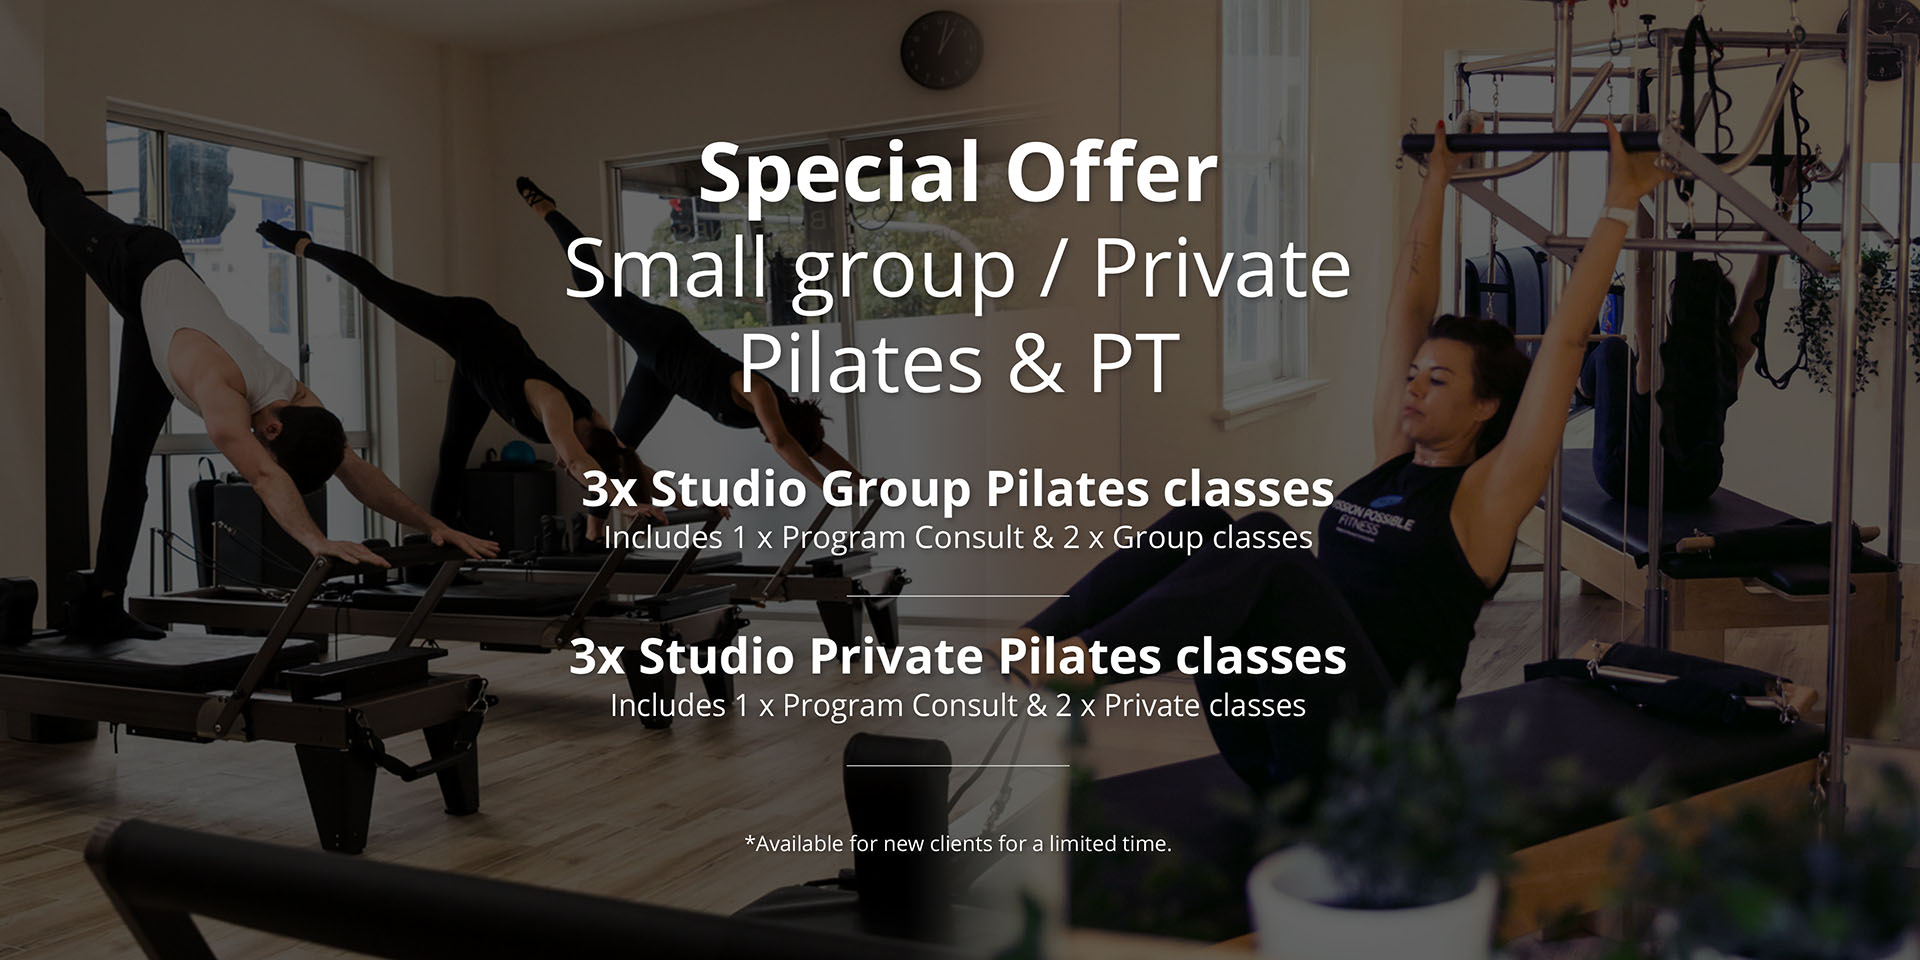 Pilates Studio, Group and Private Pilates Classes